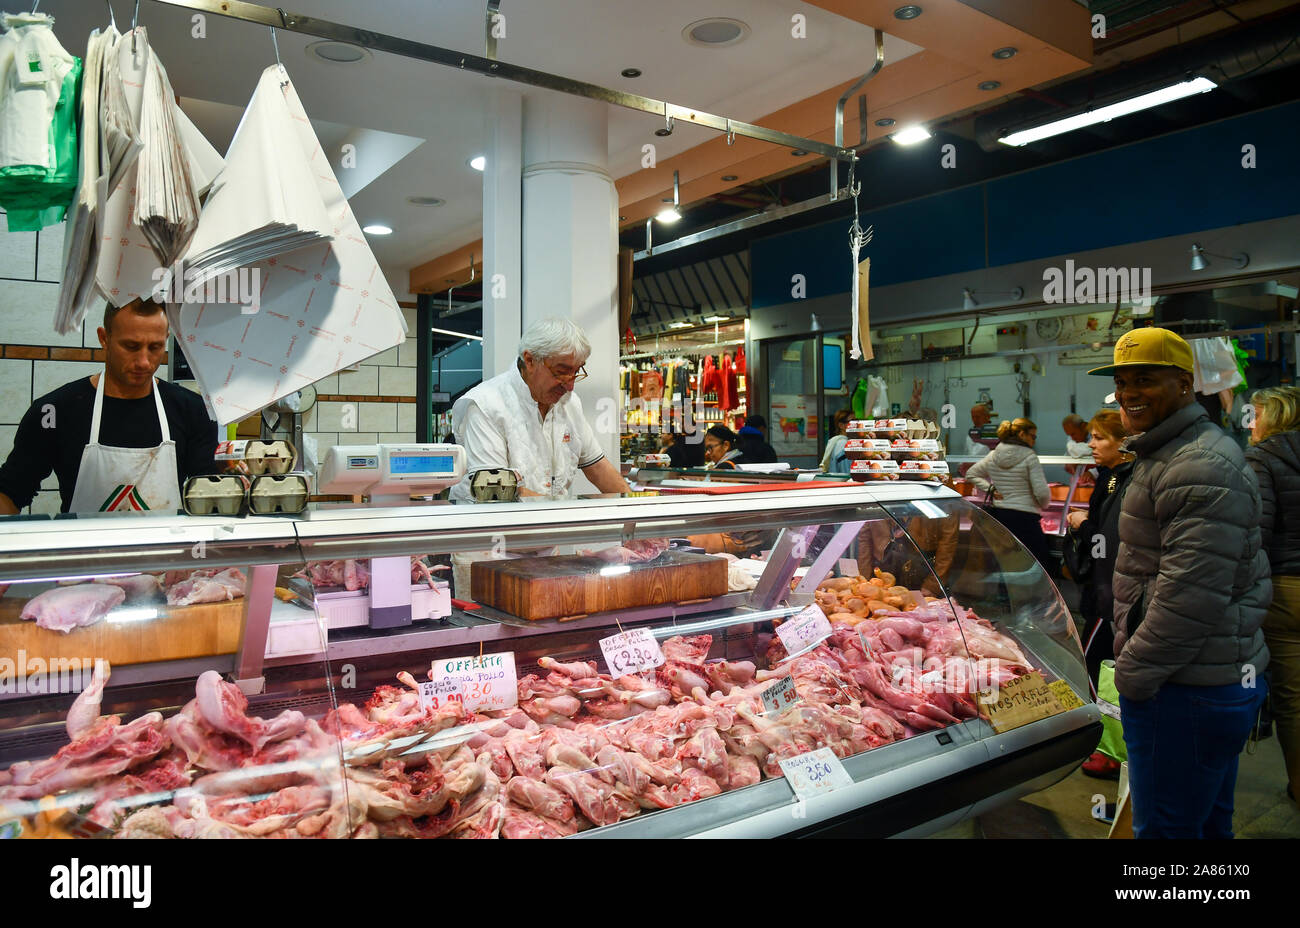 A butcher shop inside the Central Market of San Lorenzo in the city center of Florence with butchers and customers, Tuscany, Italy Stock Photo